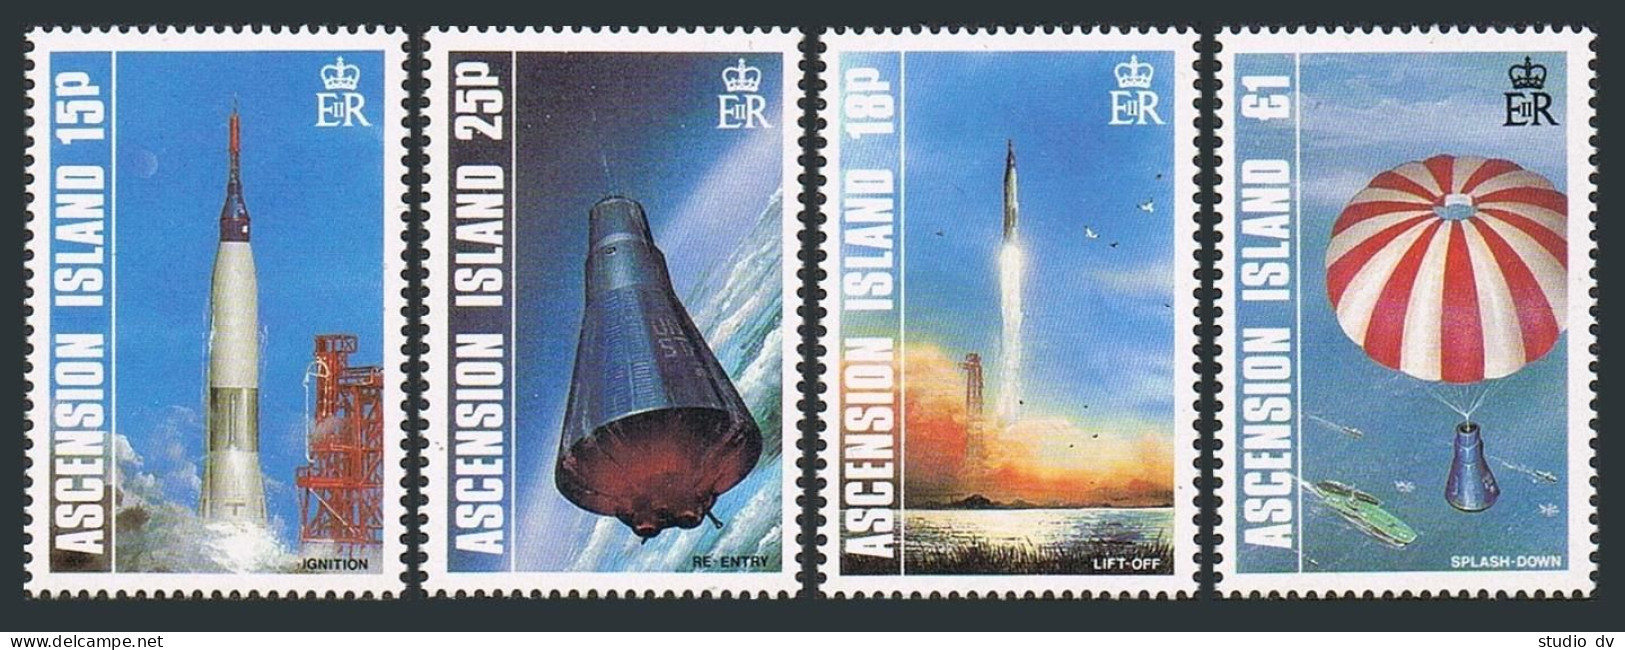 Ascension 420-423, MNH. Michel 429-432. 1st Manned Space Flight, 25th Ann. 1987. - Ascension